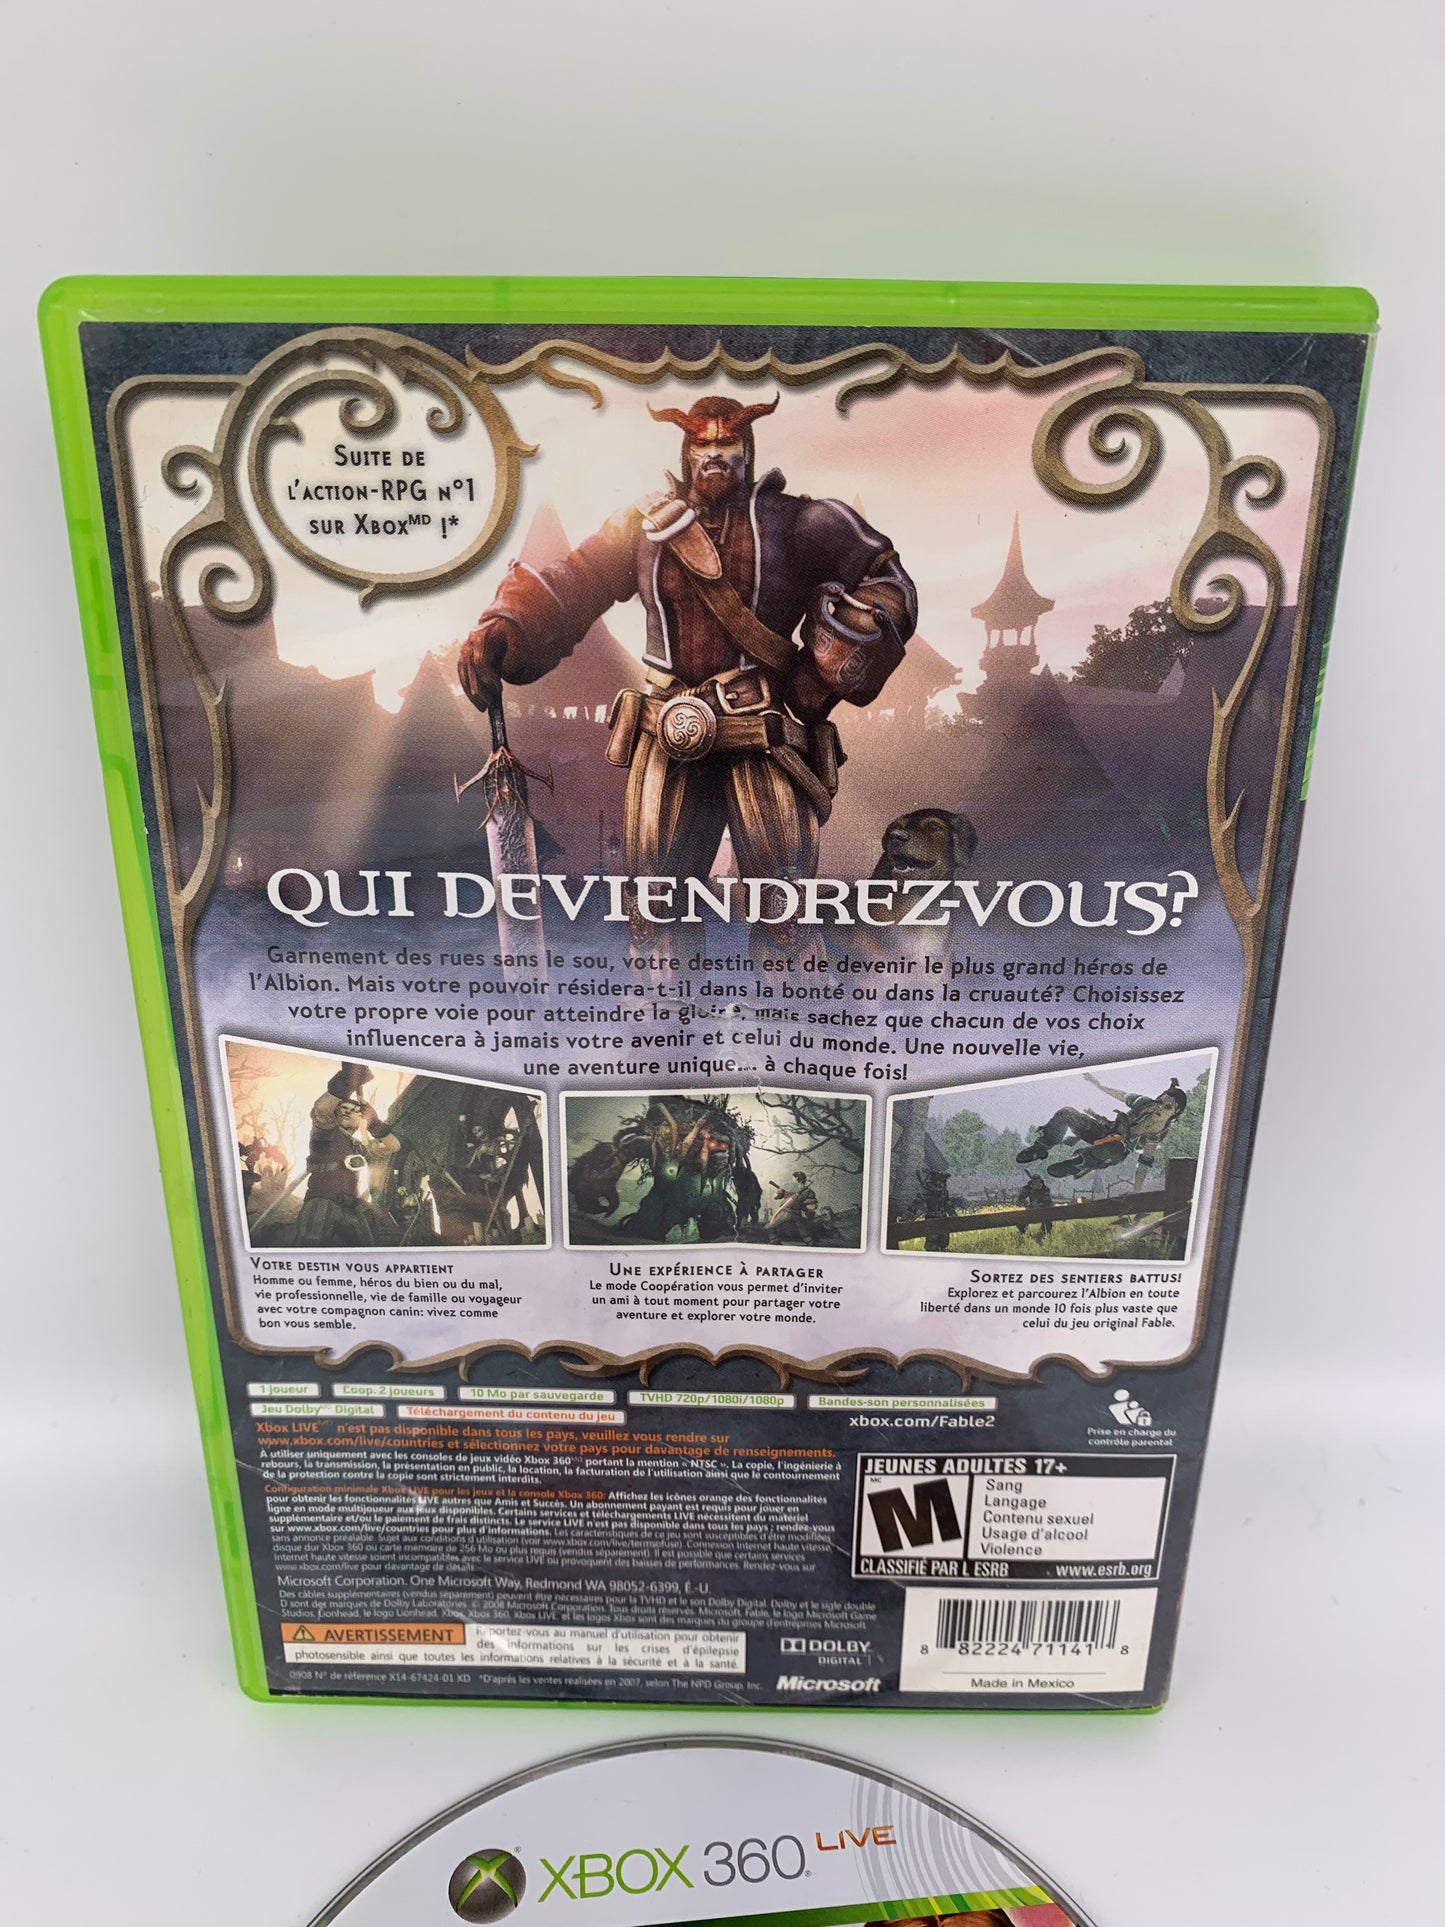 MiCROSOFT XBOX 360 | FABLE II | VERSiON FRANCAiSE